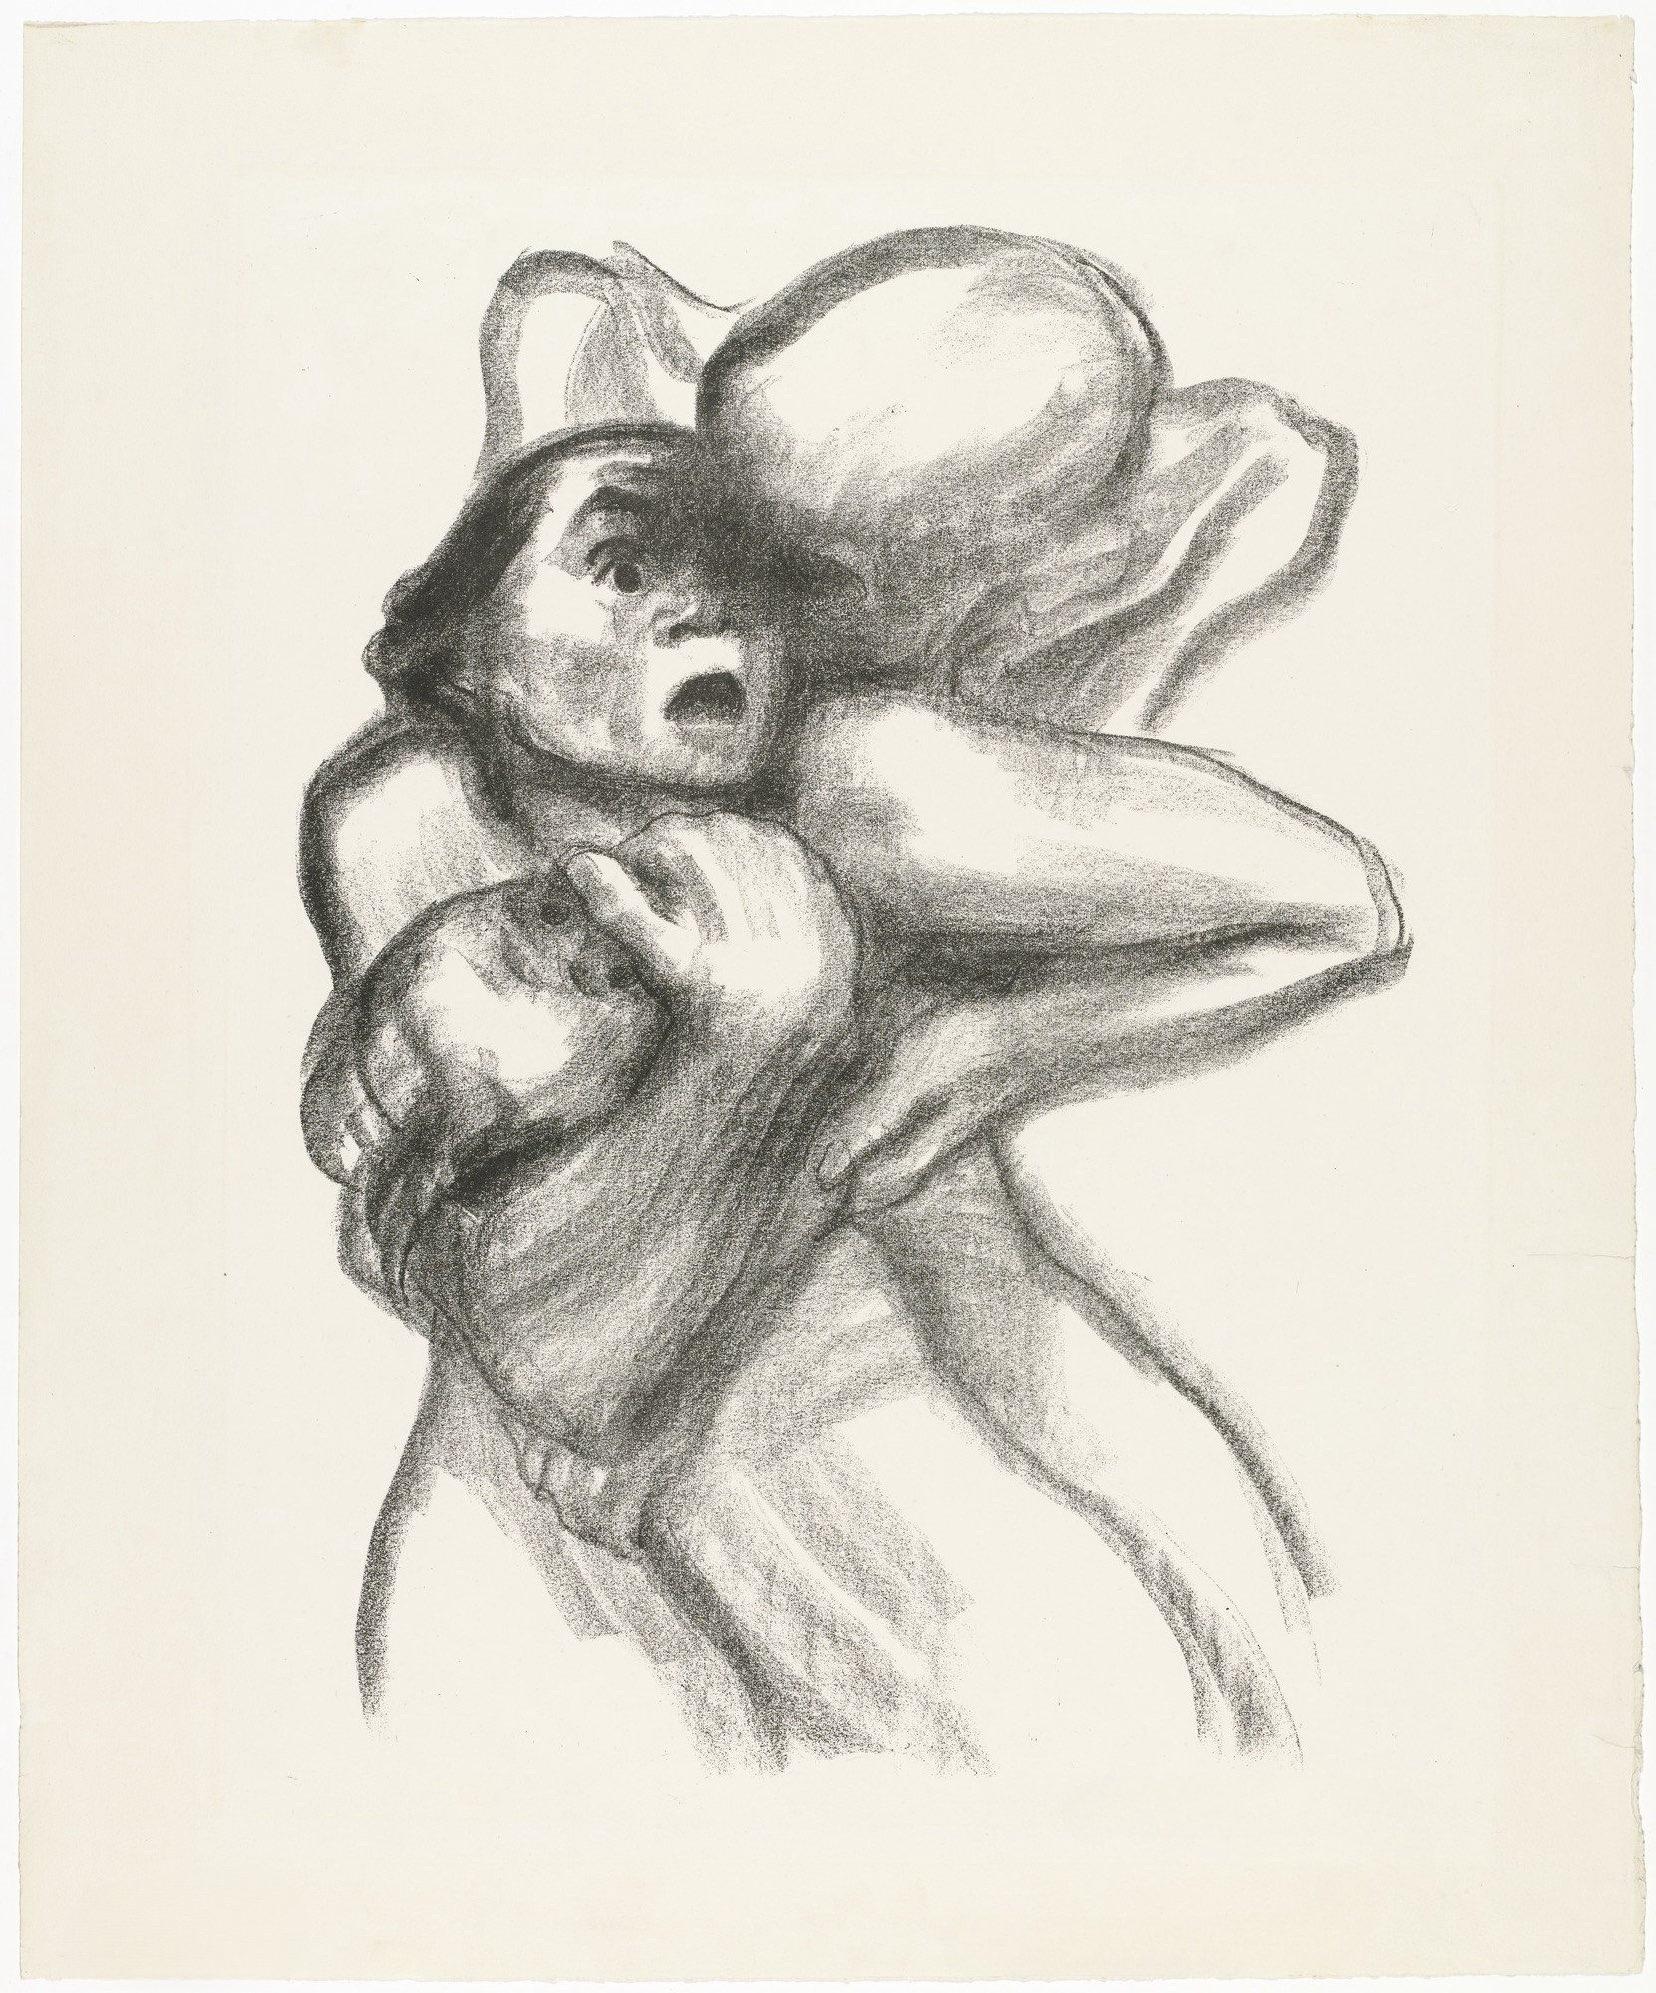 Lithograph on vélin paper. Inscription: Unsigned and unnumbered, as issued. Good condition. Notes: From the folio, Kathe Kollwitz, Ten Lithographs. Published by Henry C. Kleemann and Curt Valentin, New York, 1941.

KATHE KOLLWITZ (1867-1945) was a